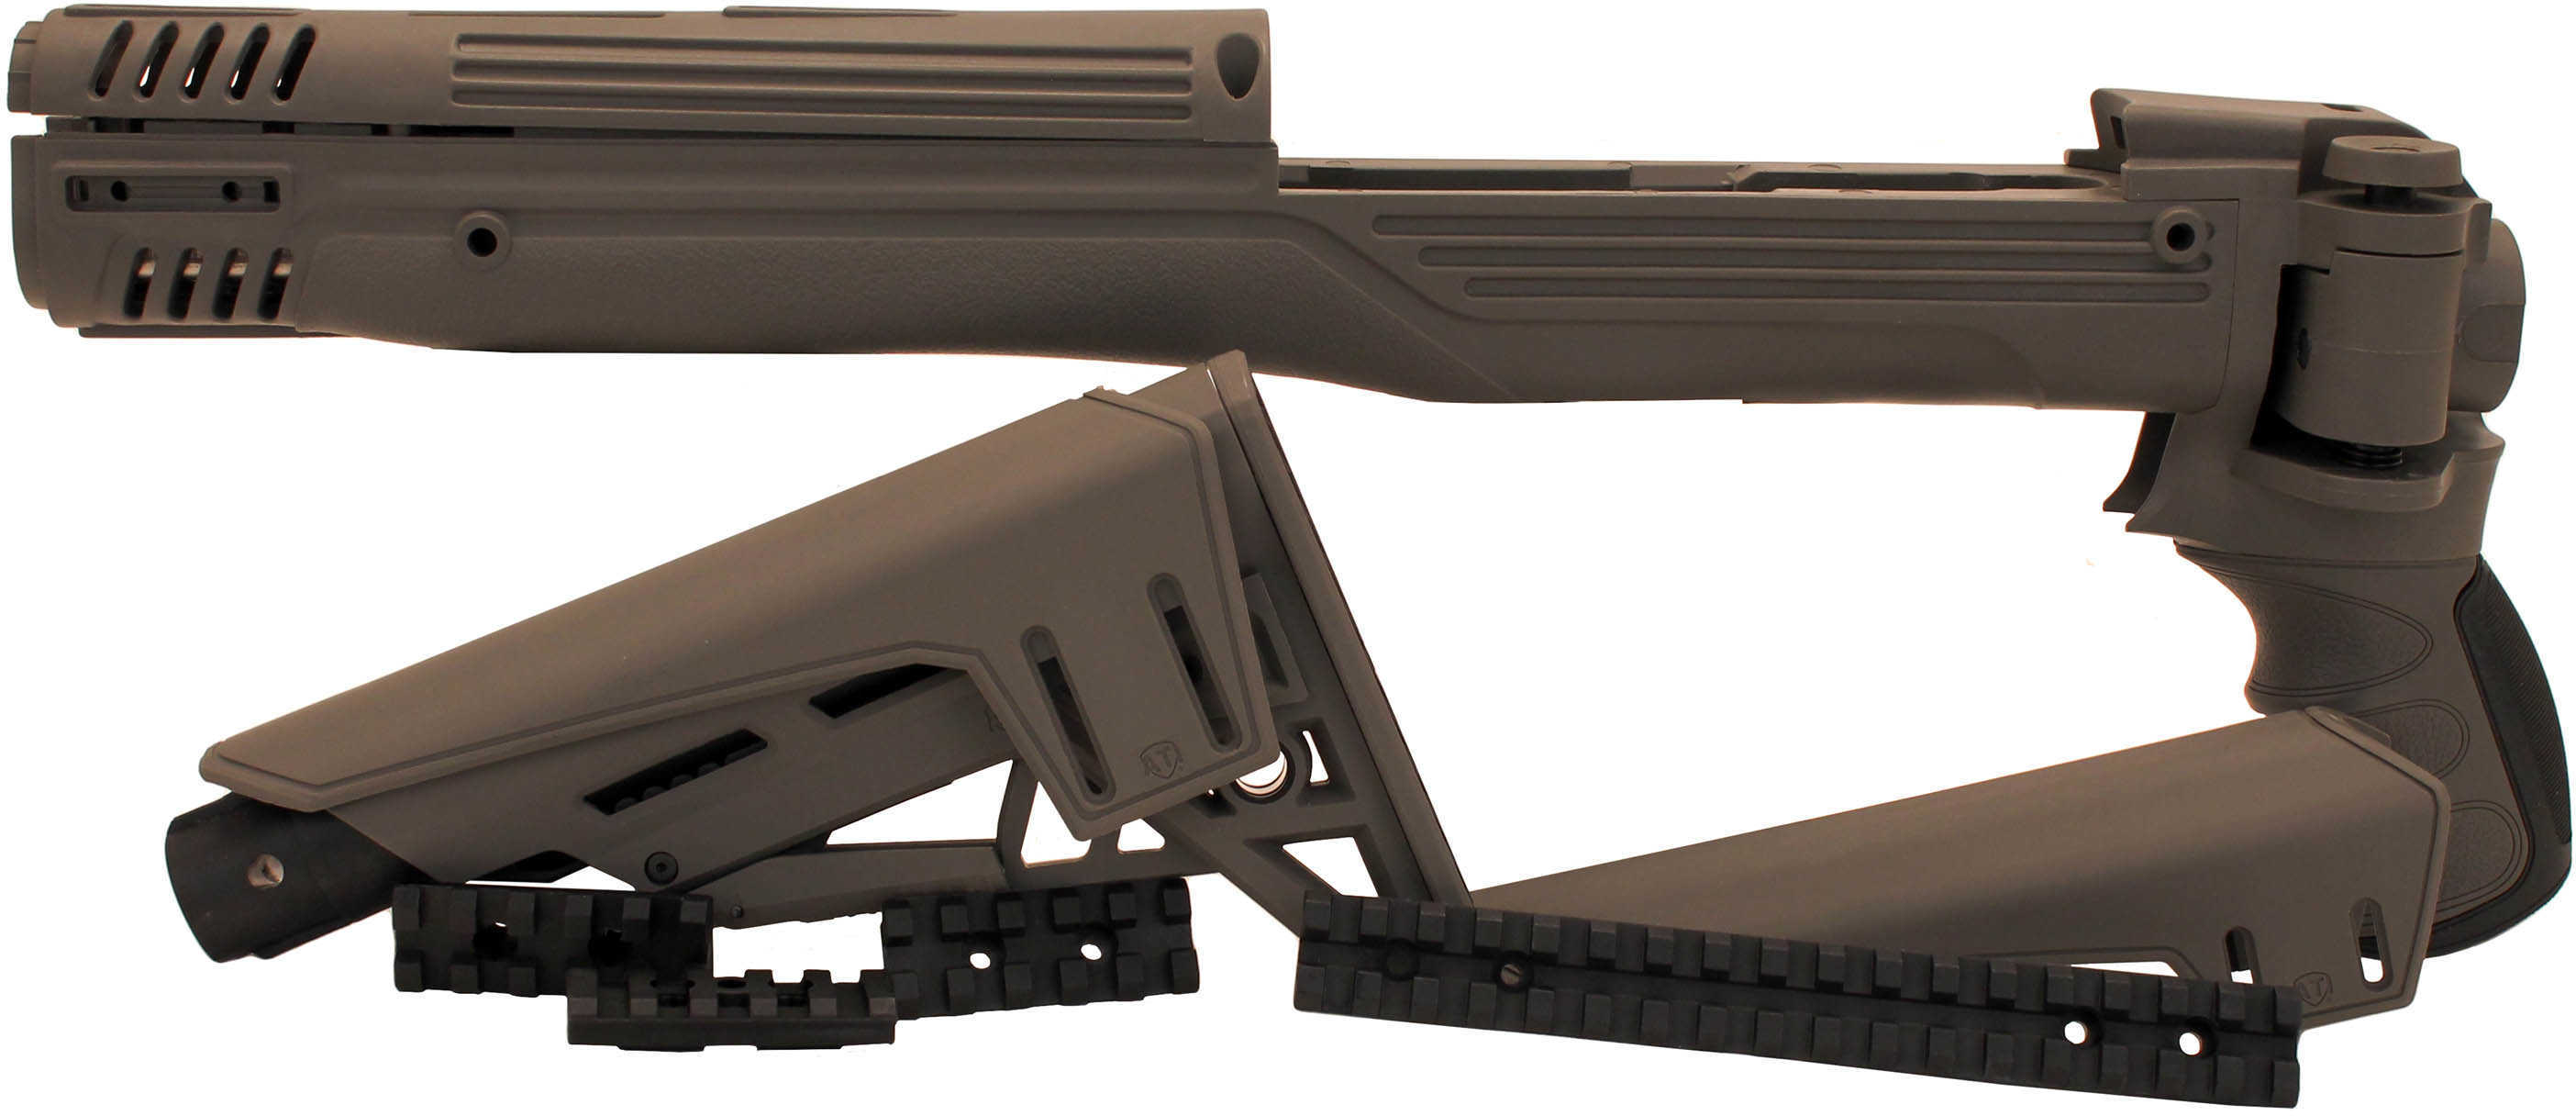 Advanced Technology Intl. Adv. Tech. Ruger Mini-14/30 Strikeforce In Destroyer Gray